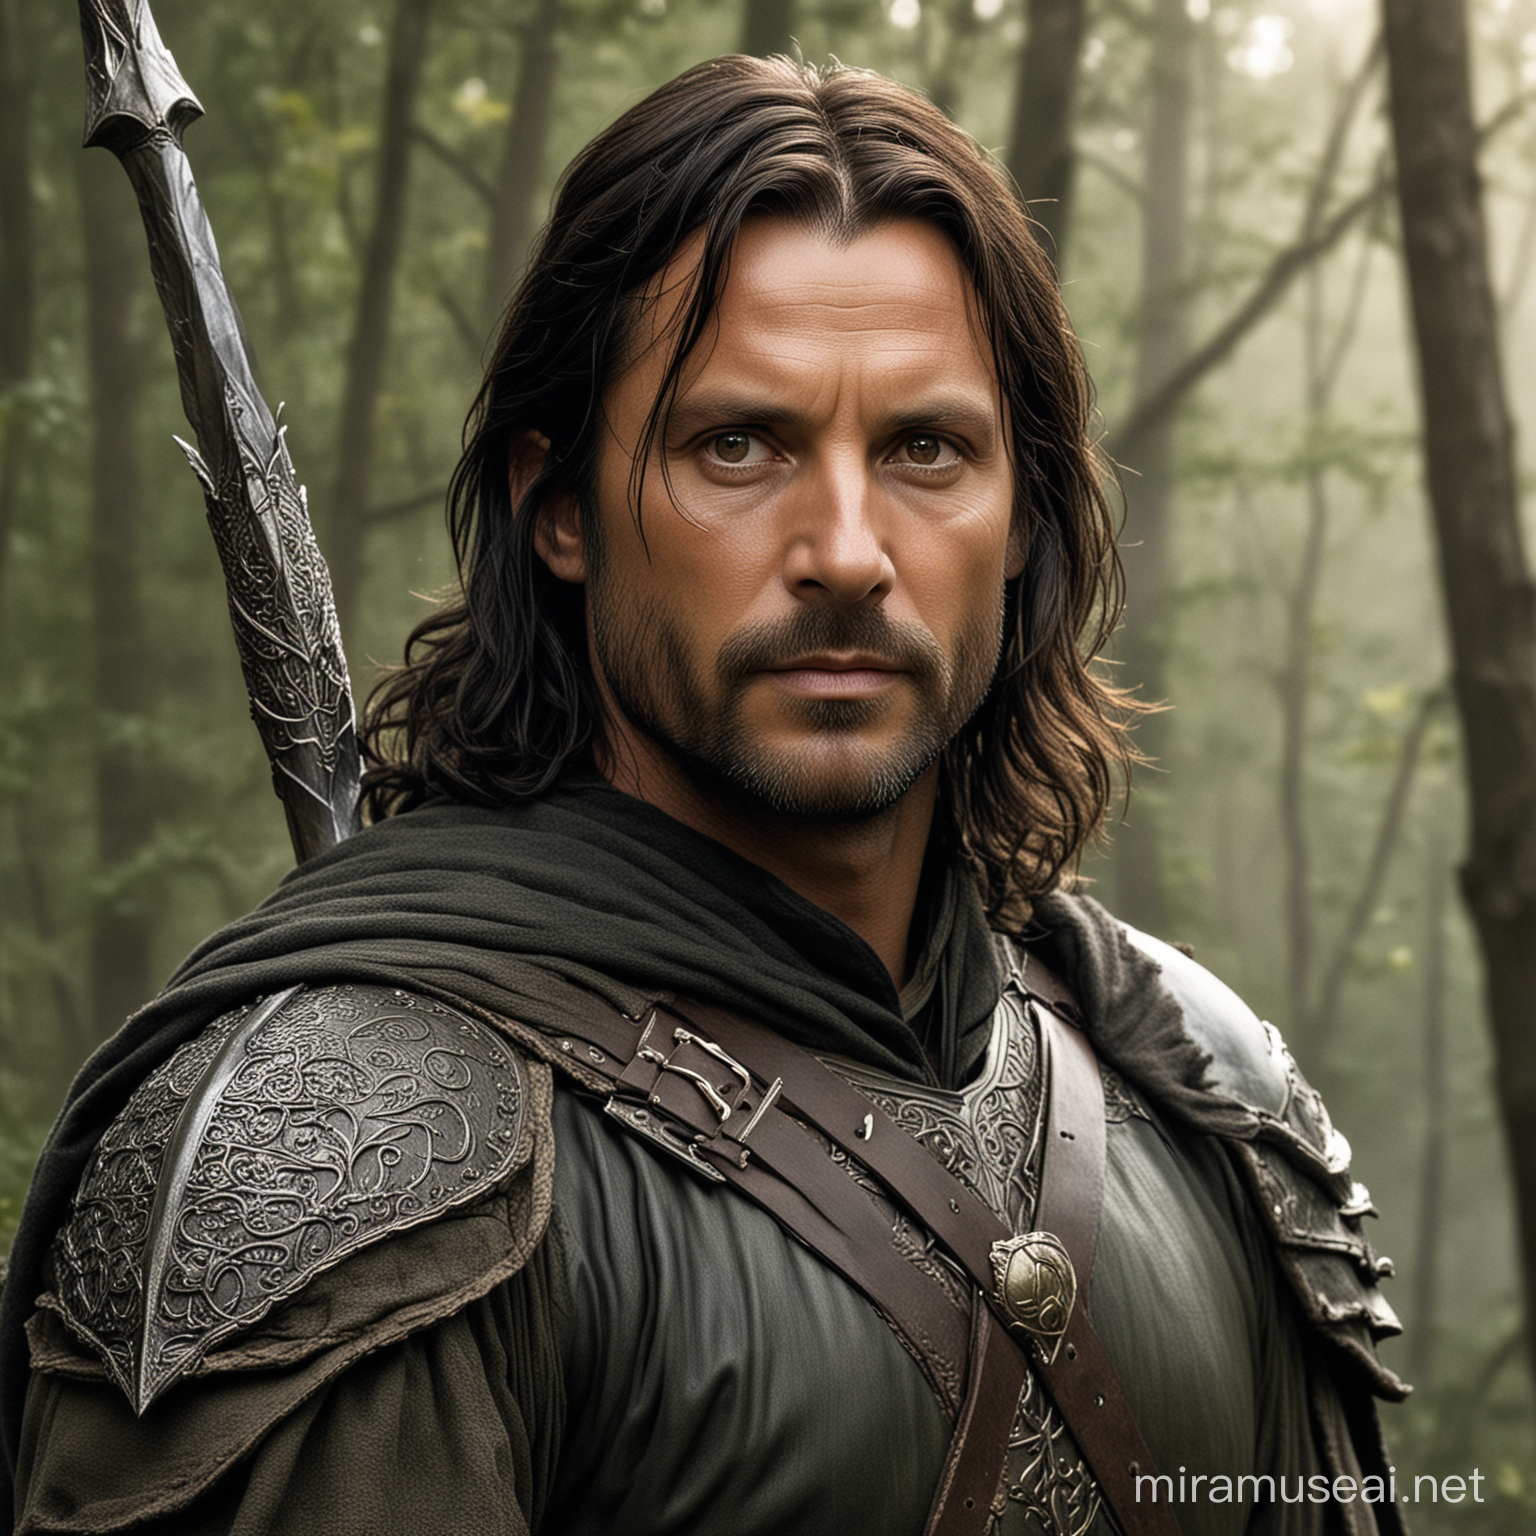 40 year old man with dark hair and brown eyes who looks like Aragorn, tall and noble in a forested background. He is a warrior, but also a king. He holds a spear.